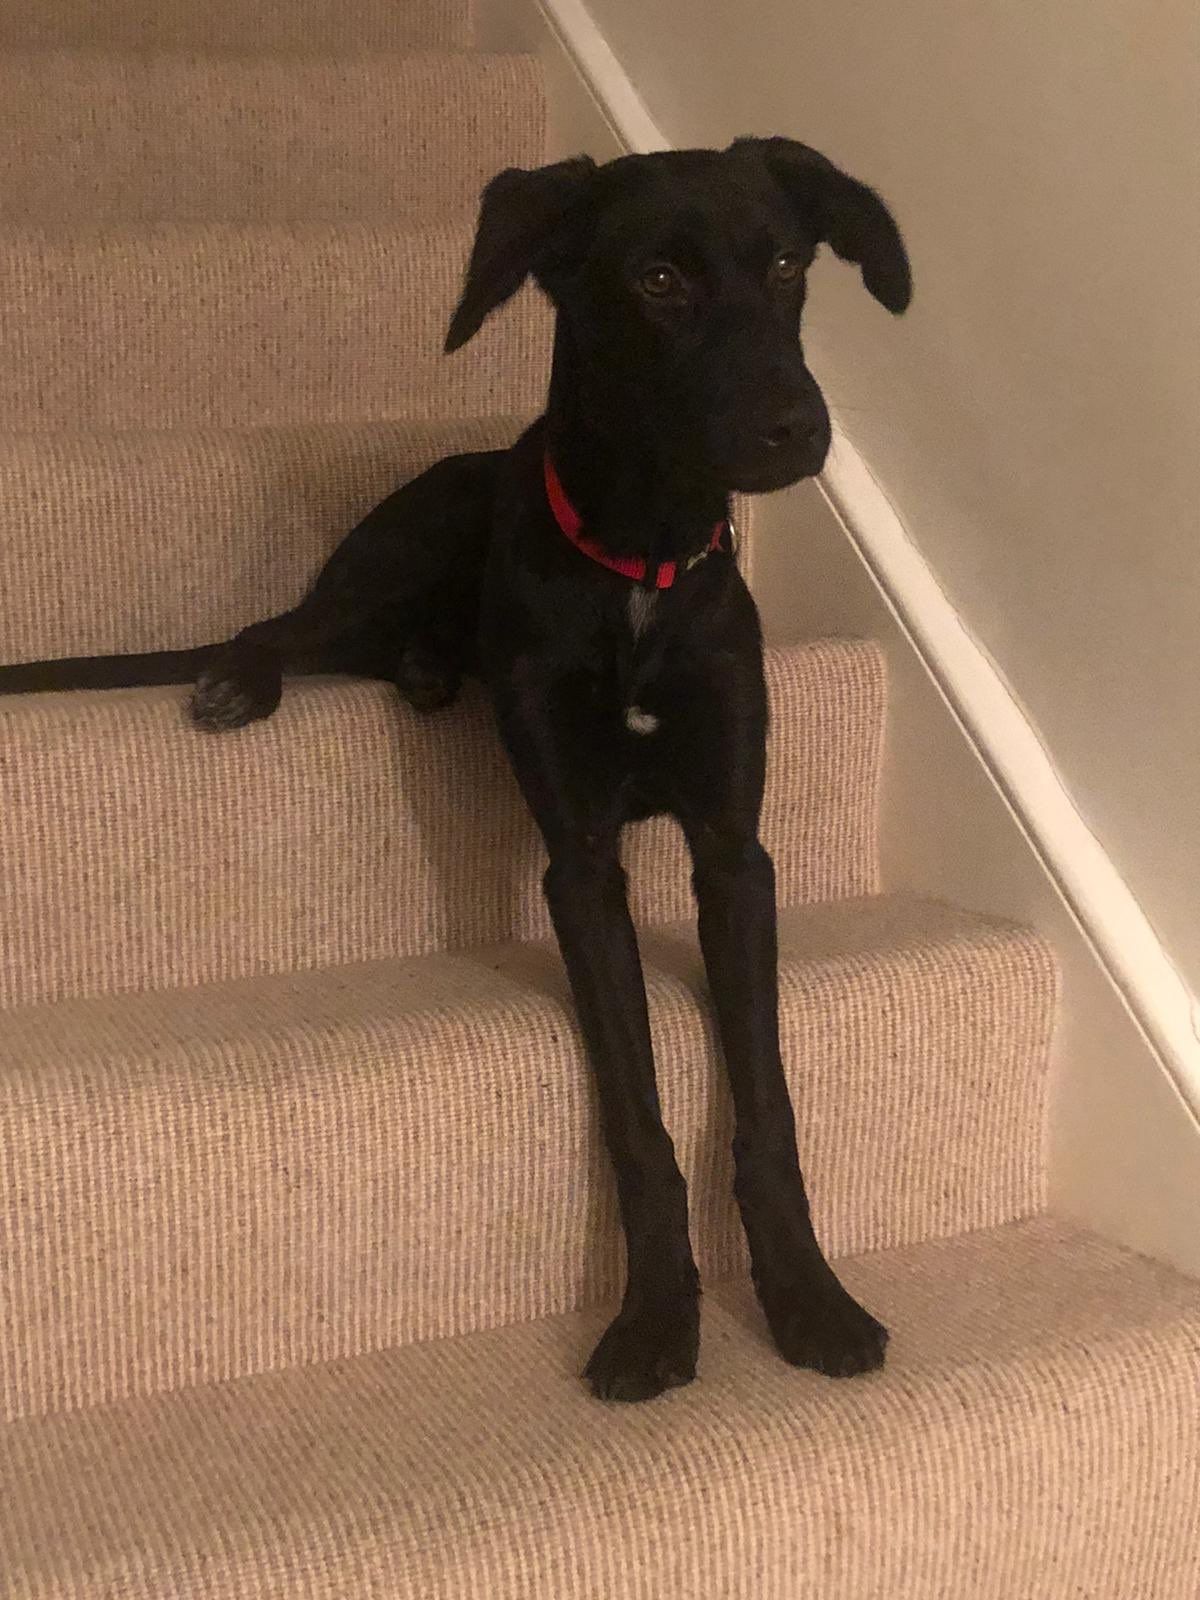 black dog sitting on a stair with the front legs on stair two steps below